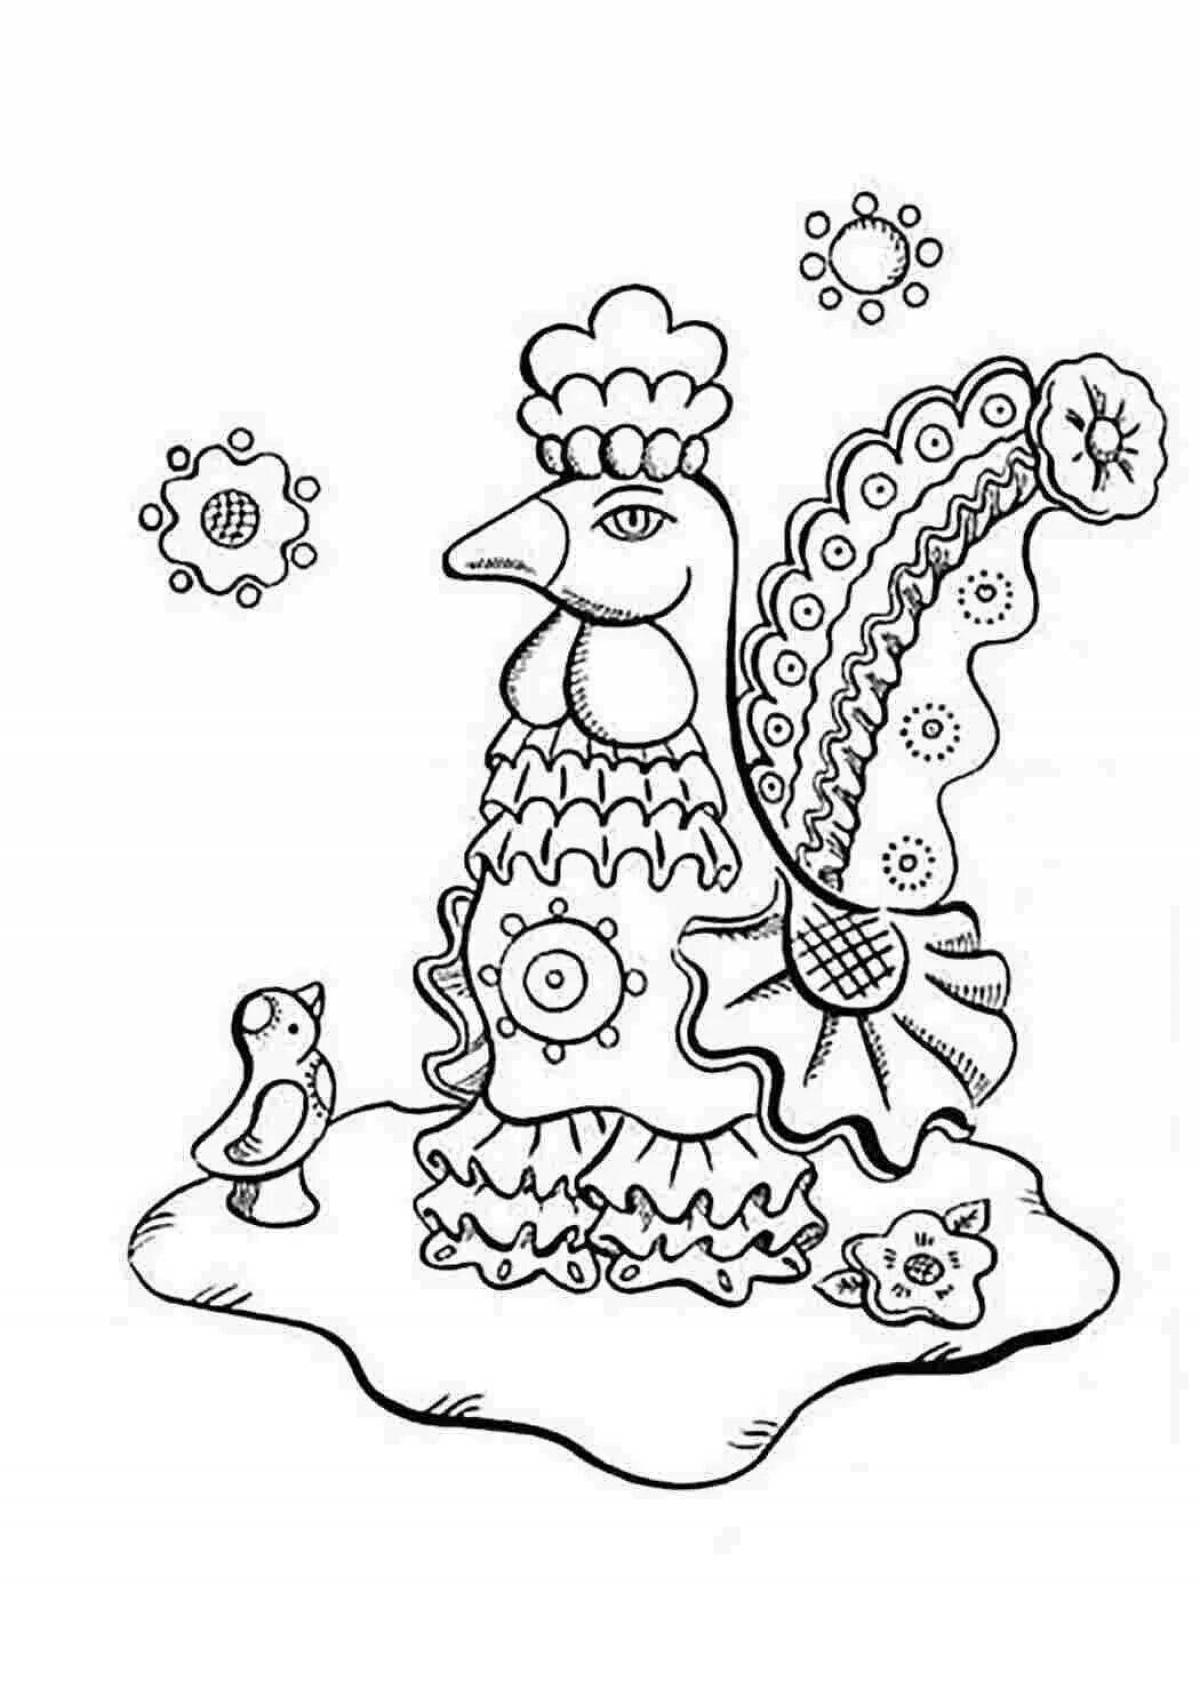 Coloring page cute roman toy